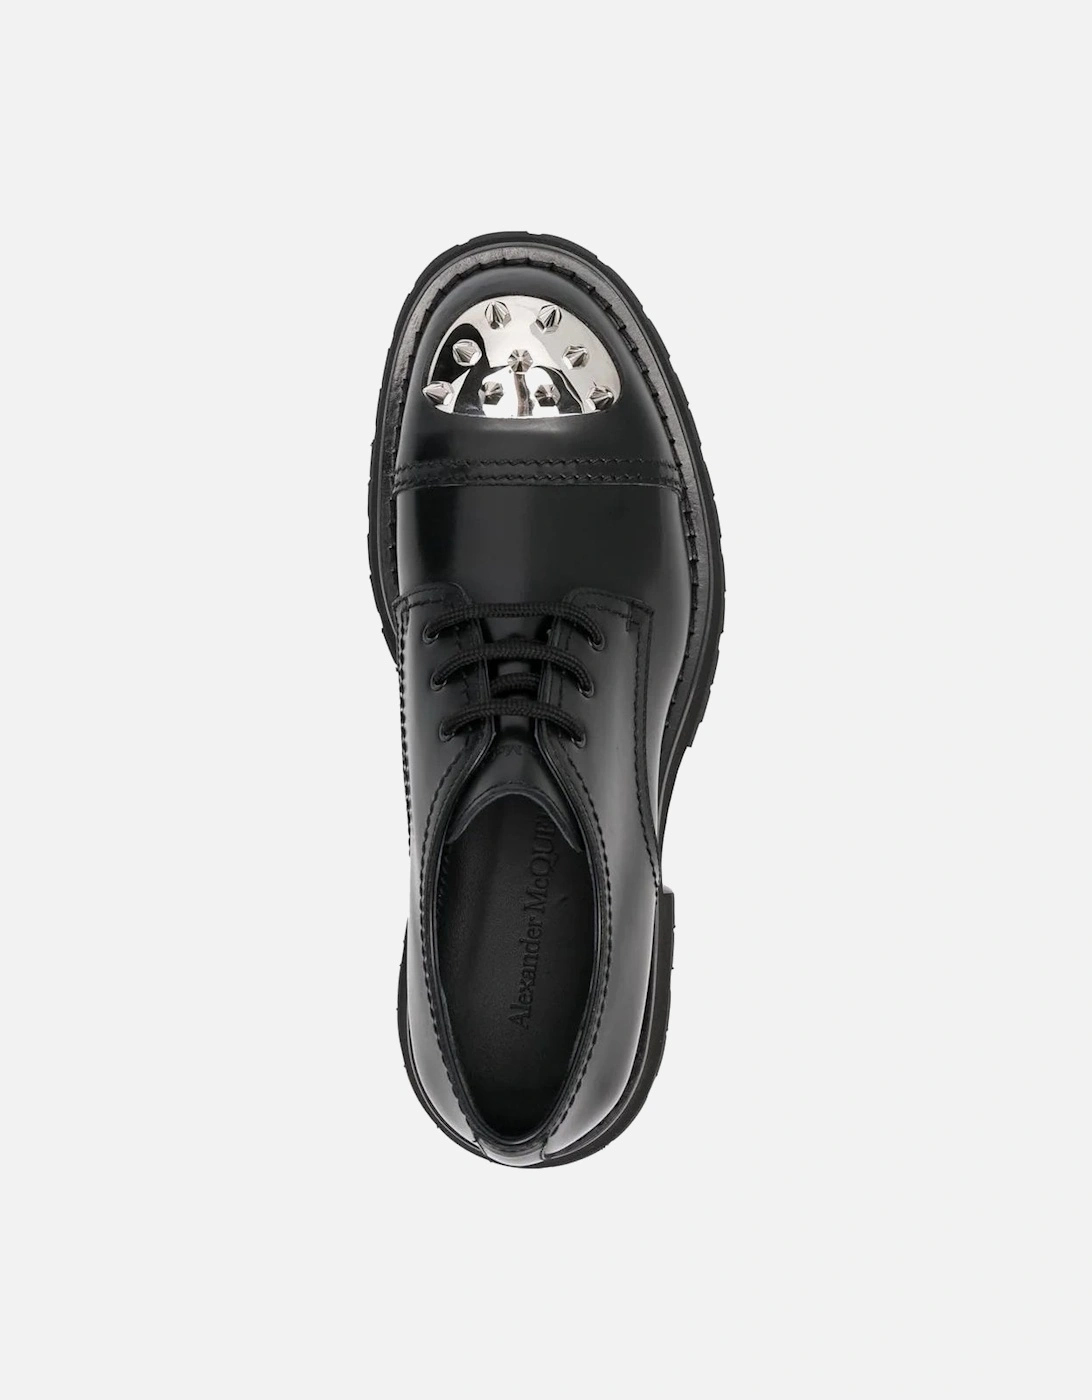 Low Studed Shoes Black